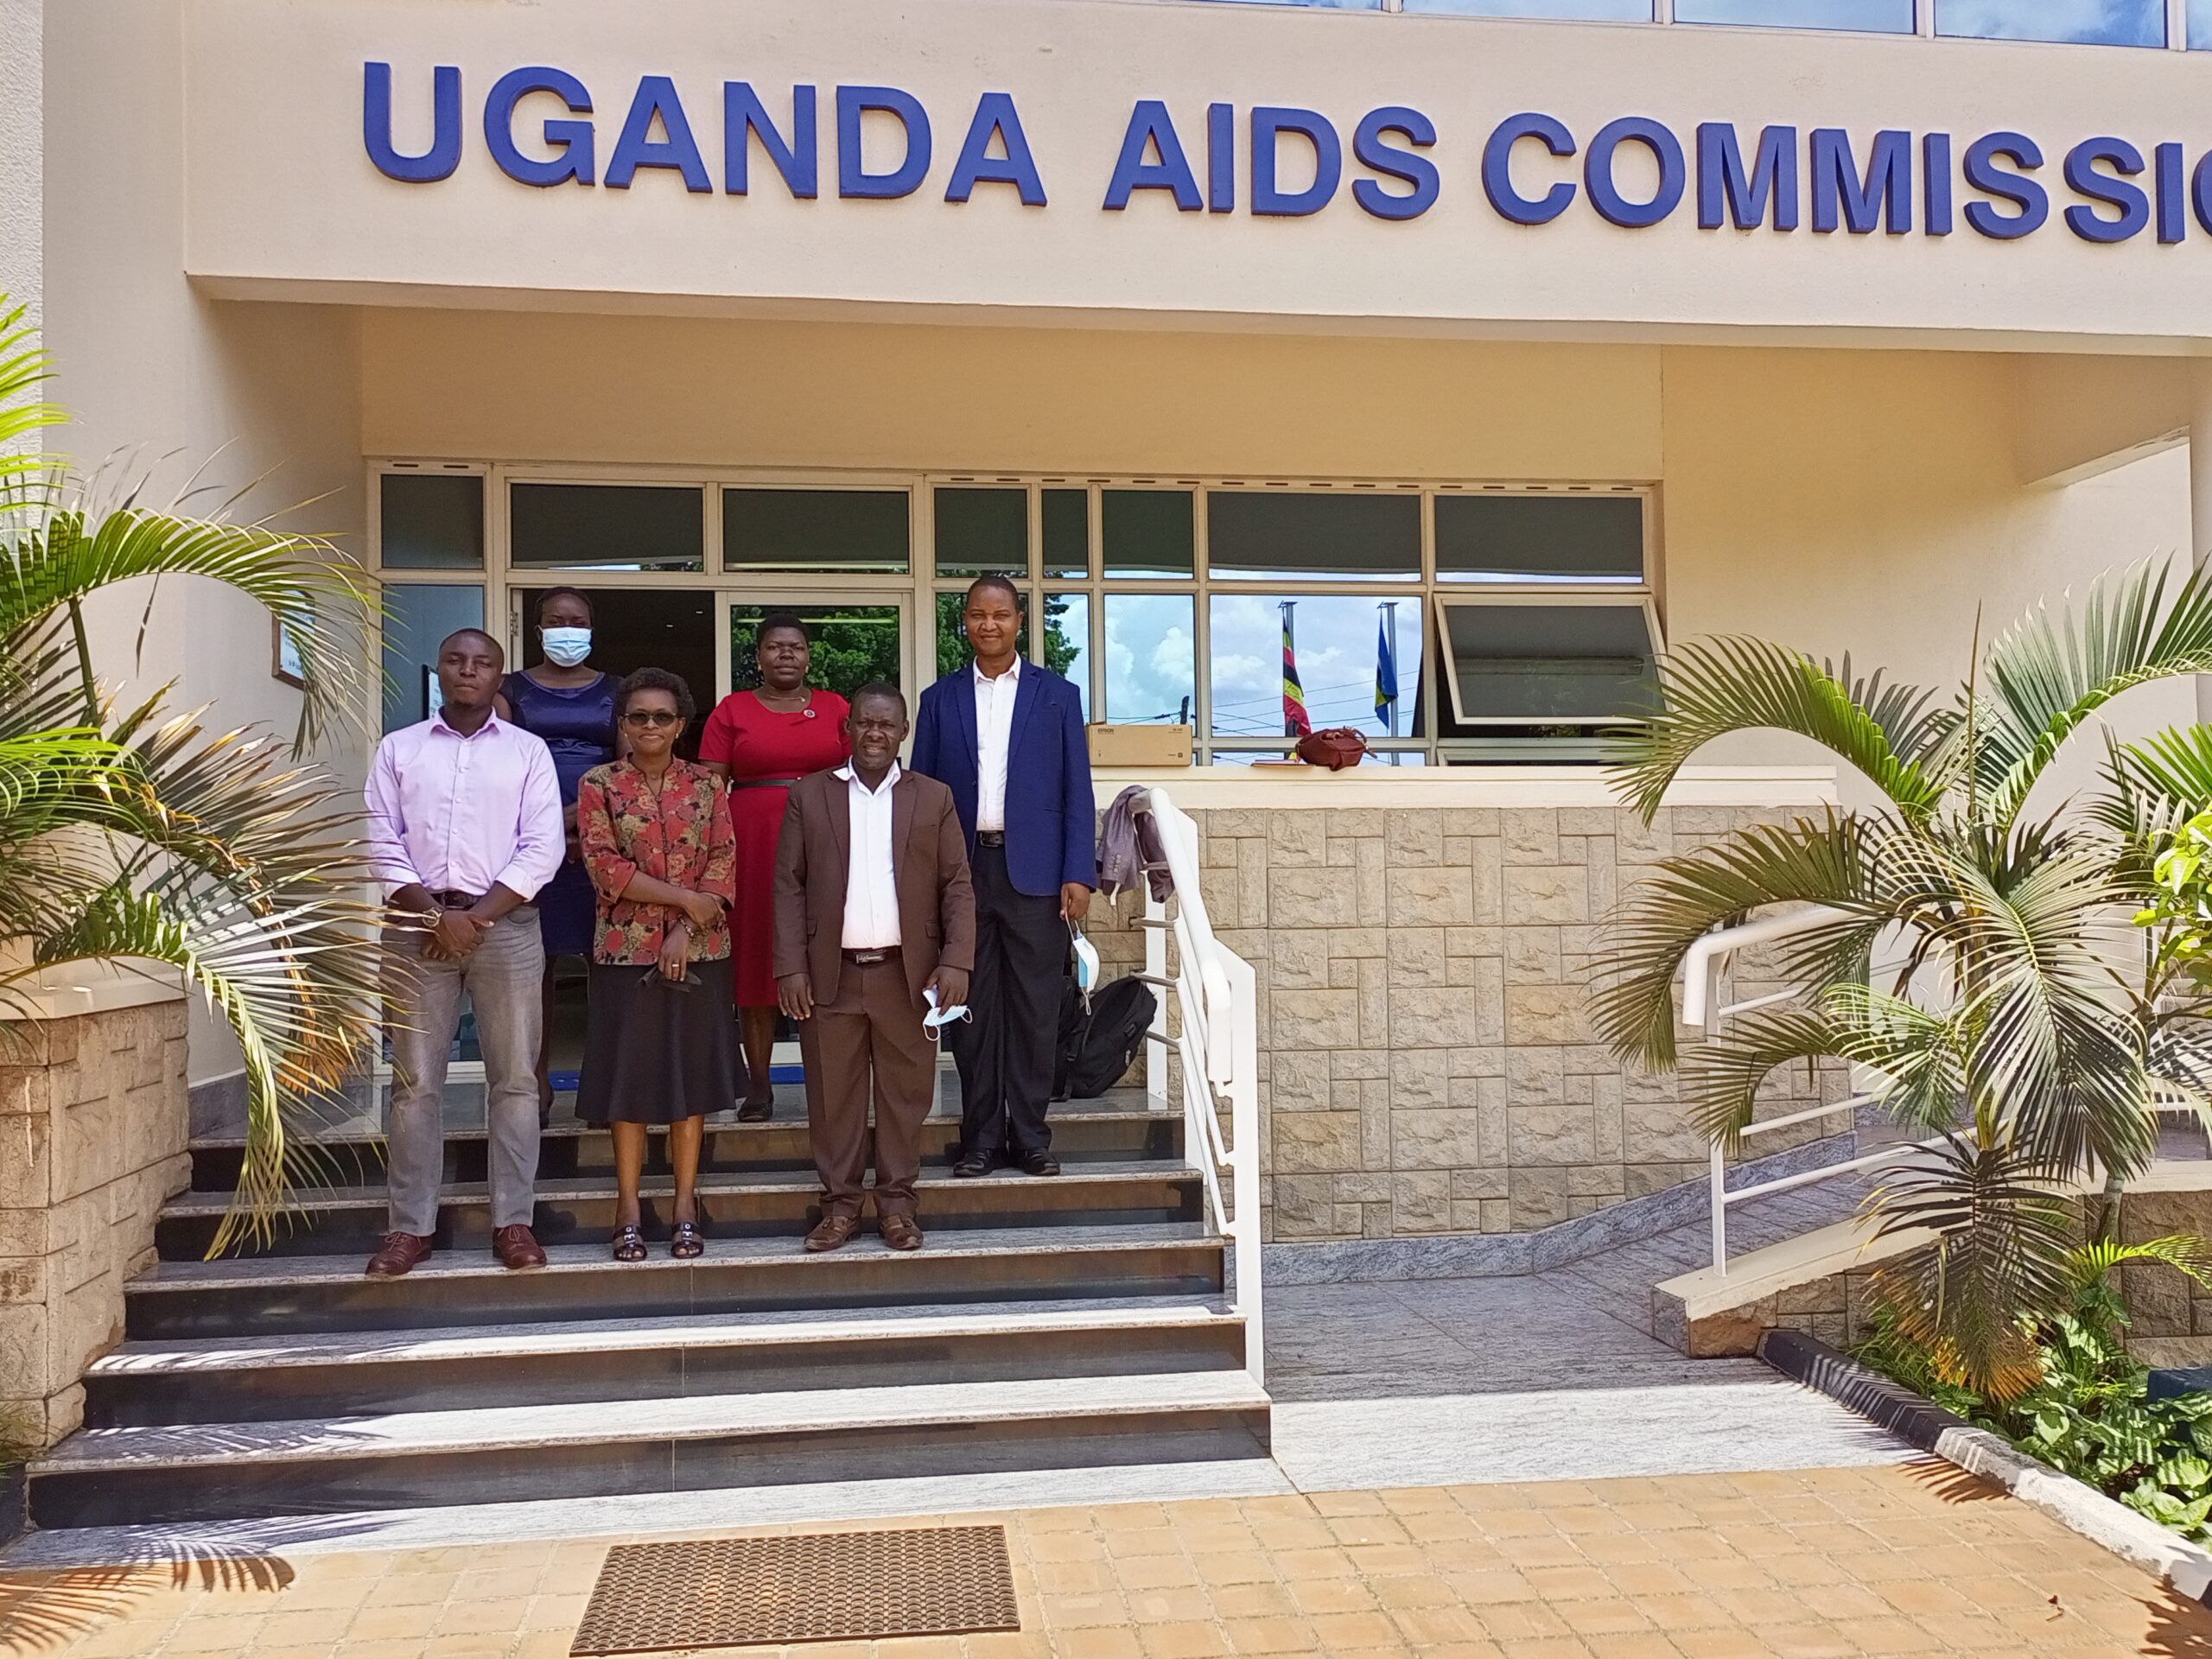 HIV and AIDS services